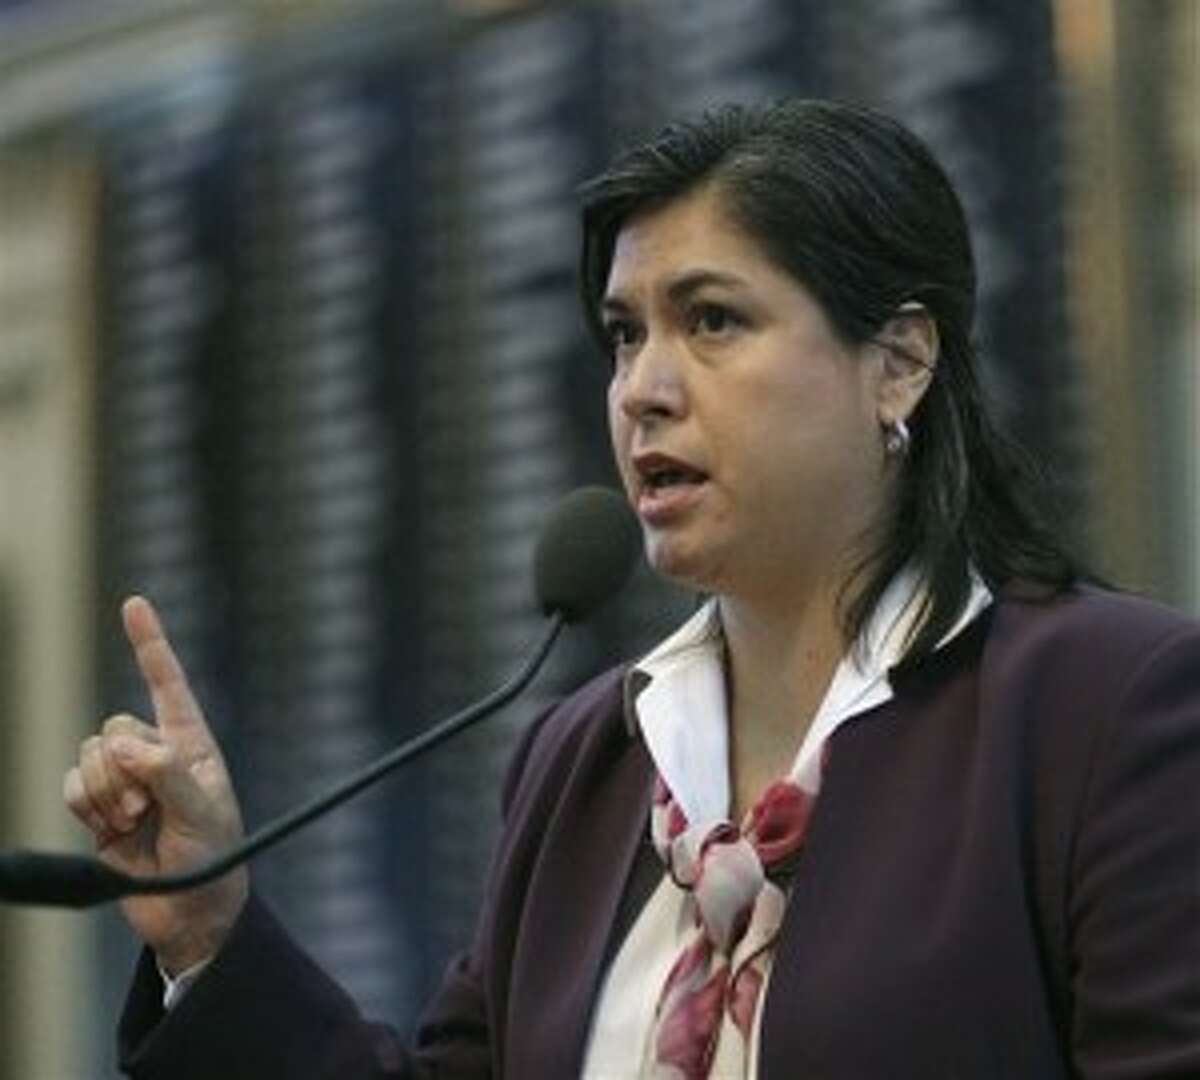 State Rep. Jessica Farrar, D-Houston, filed a bill Friday that would penalize men for "unregulated masturbatory emissions." The satirical House Bill 4260 would encourage men to remain "fully abstinent" and only allow the "occasional masturbatory emissions inside health care and medical facilities," which are described in the legislation as the best way to ensure men's health. Such an emission would be considered "an act against an unborn child, and failing to preserve the sanctity of life," according to the legislation. >>>Scroll through the gallery to see the key players in the ongoing Texas legislative session and the state's long history with the issue of abortion